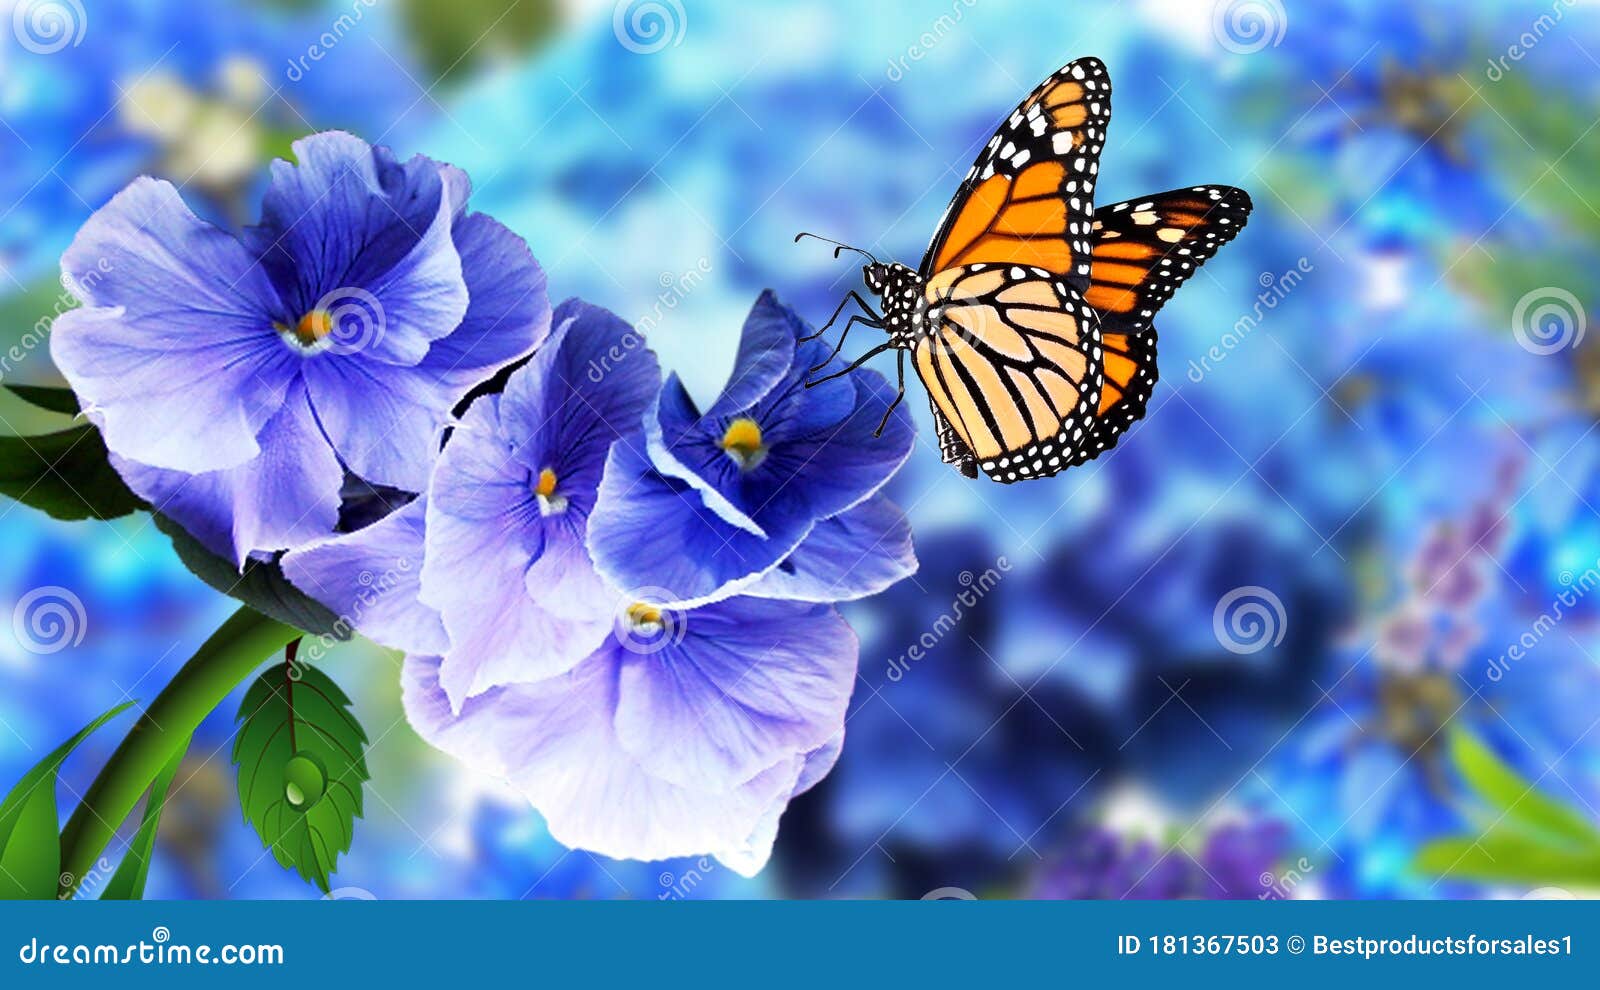 Butterfly on Flowers with Blurry Natural Background. Beautiful ...